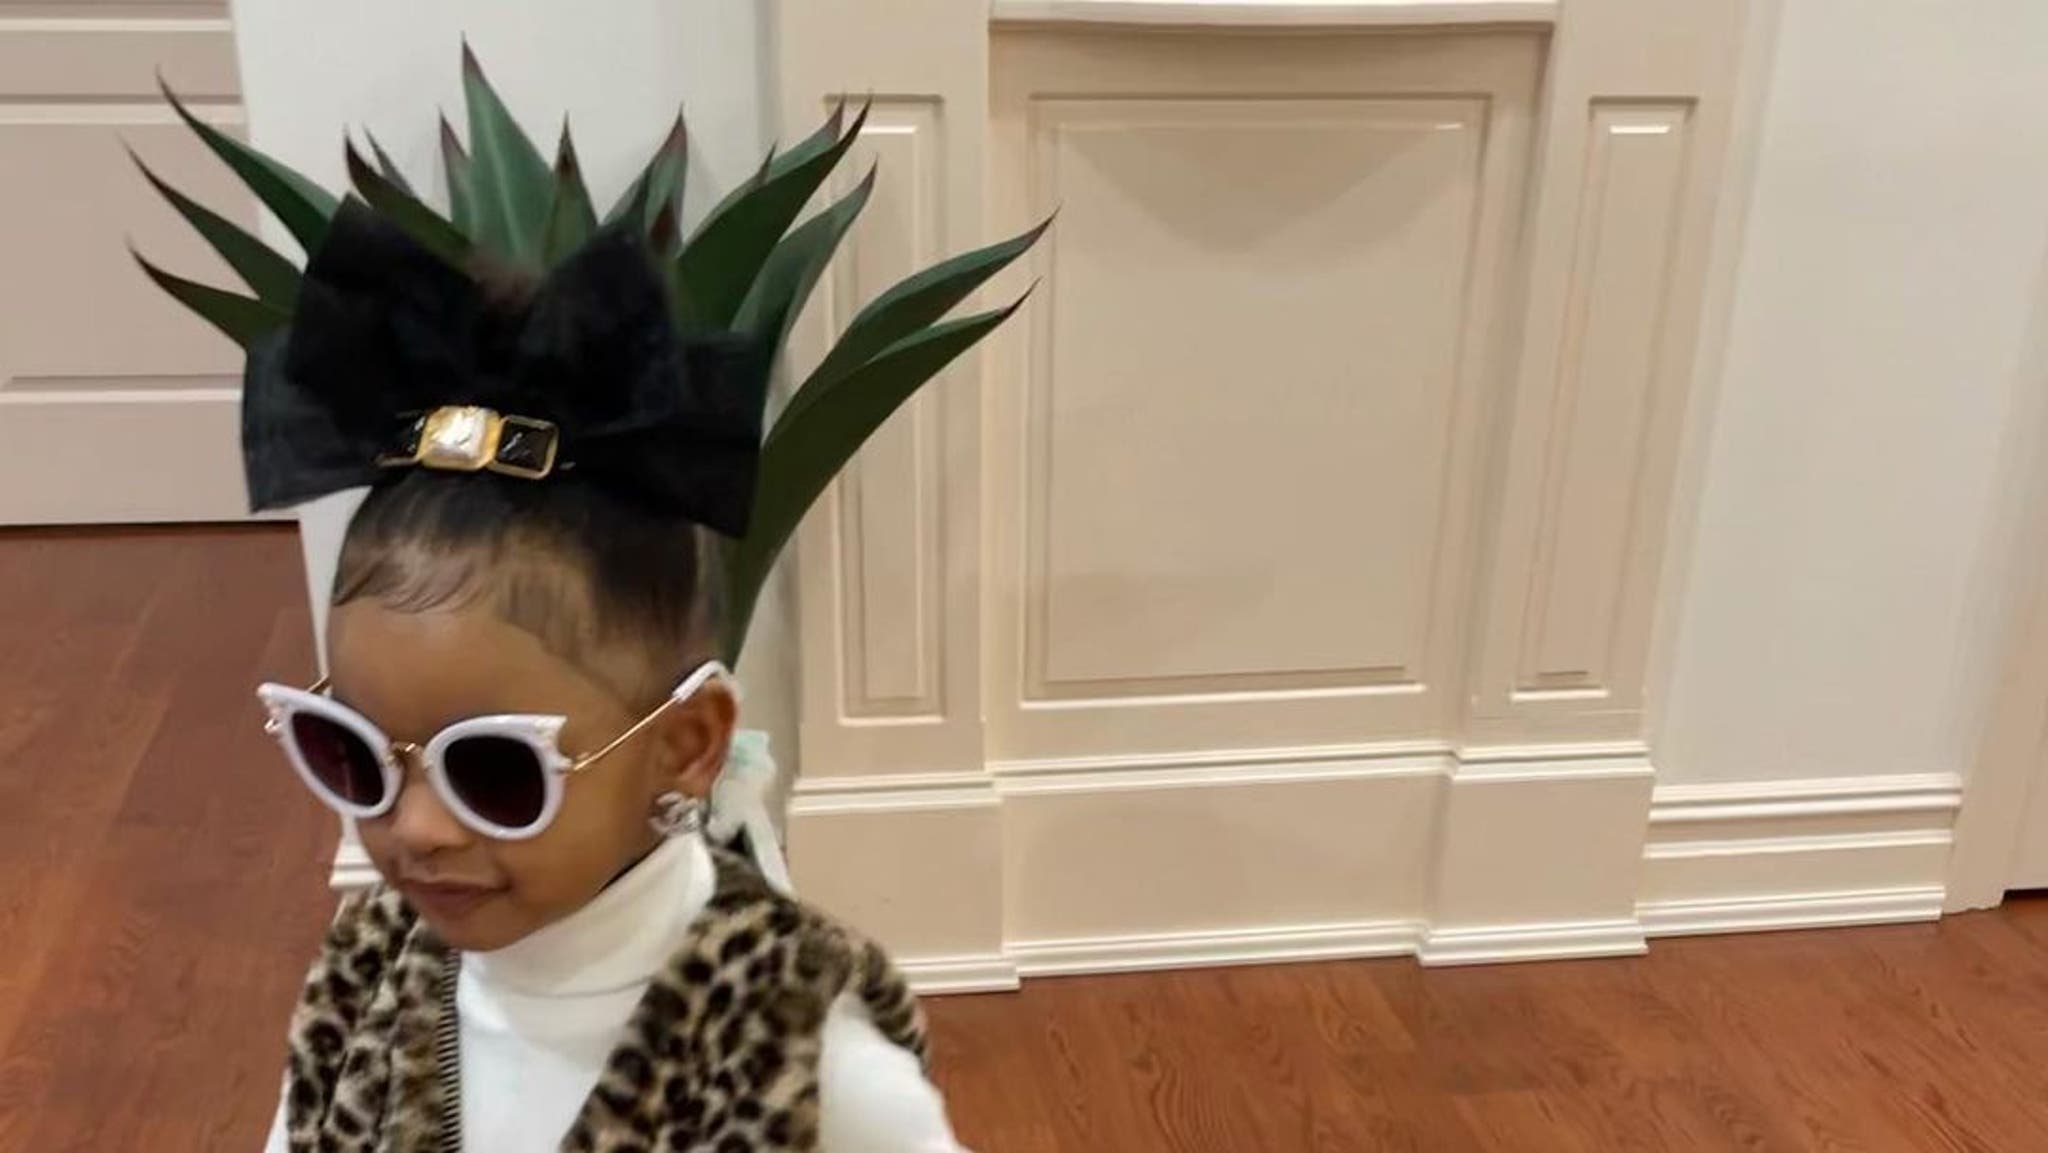 Cardi B's 2-year-old daughter poses with her new $4,212 Dior handbag and  Chanel earrings after the star spent more than $26,600 to shop for her